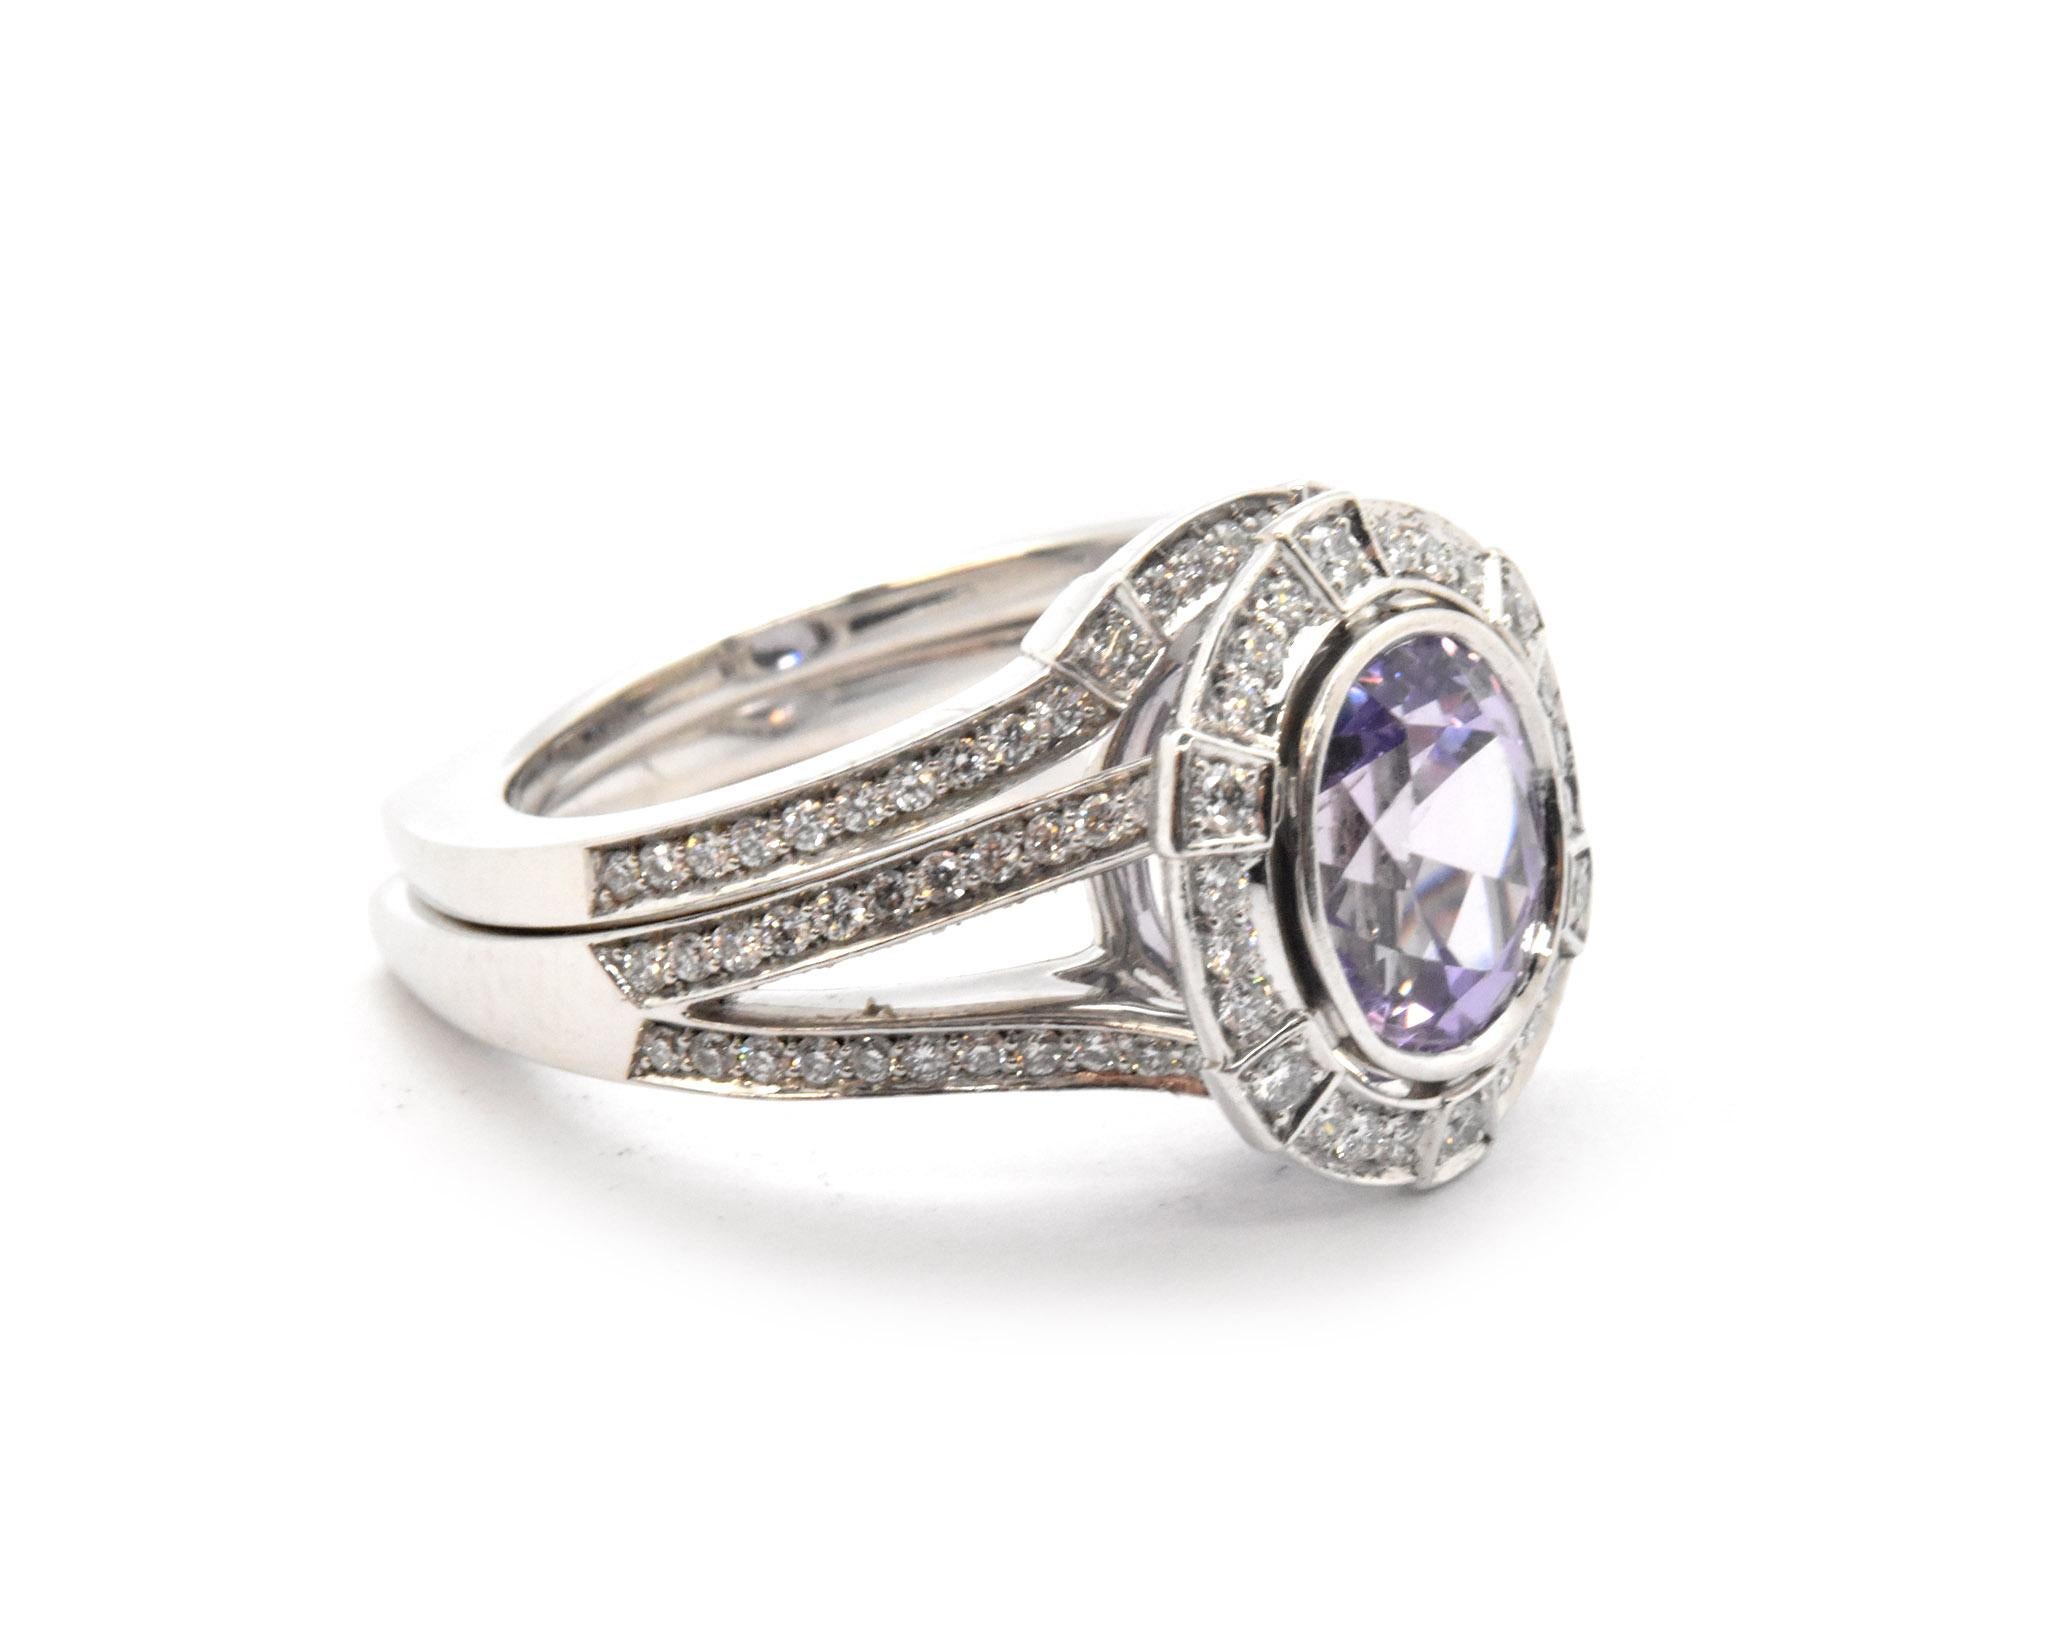 This set features a lovely engagement ring set with a truly impressive oval purple 2.29ct all natural sapphire surrounded by a halo of diamonds. All natural purple sapphires are scarce and are perfect to show someone important just how special they